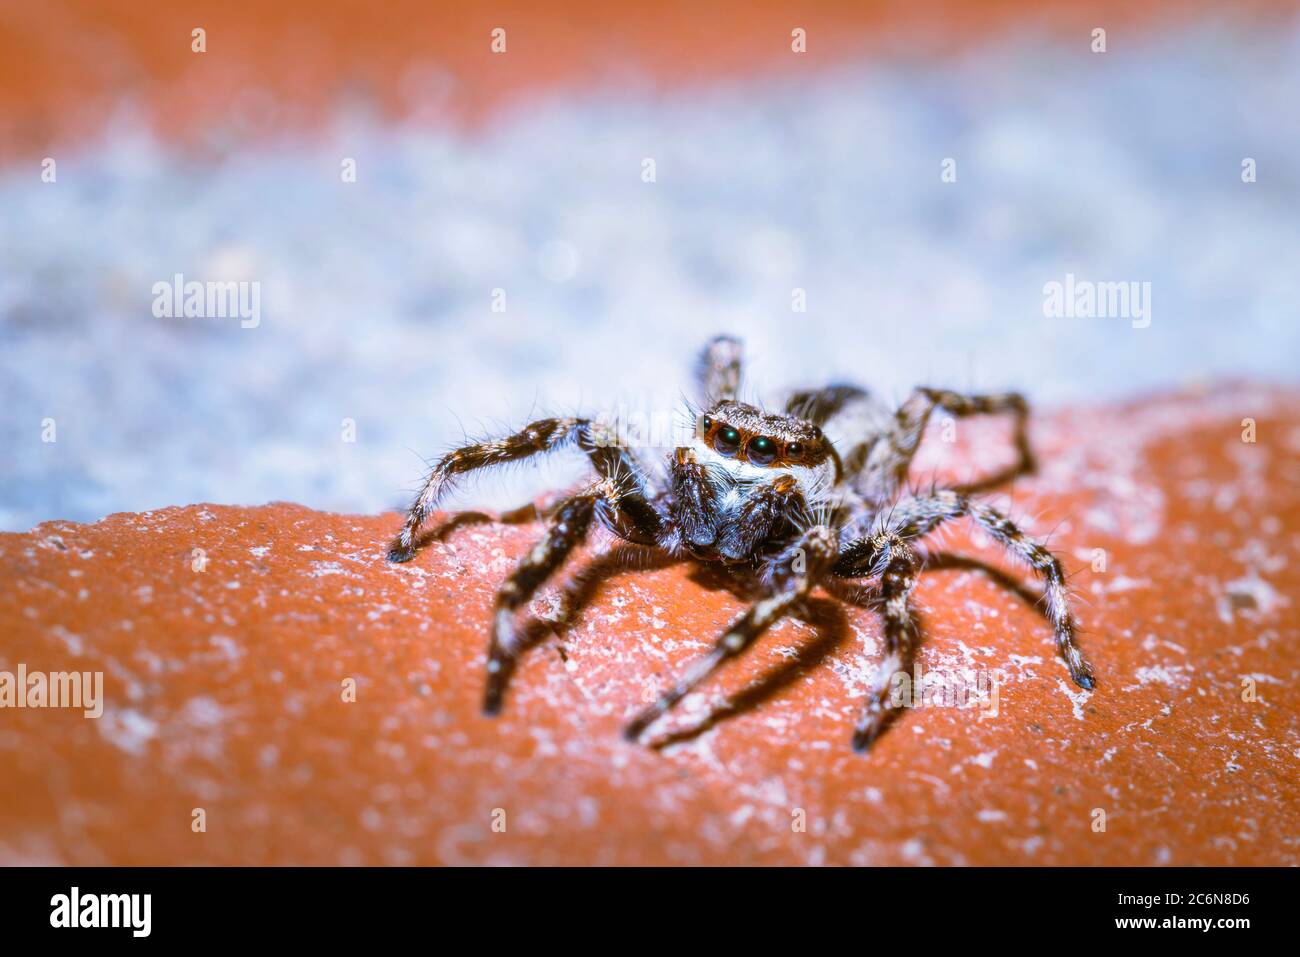 Black and White striped Jumping spider (salticidae) sitting on a wall, Cape Town, South Africa Stock Photo